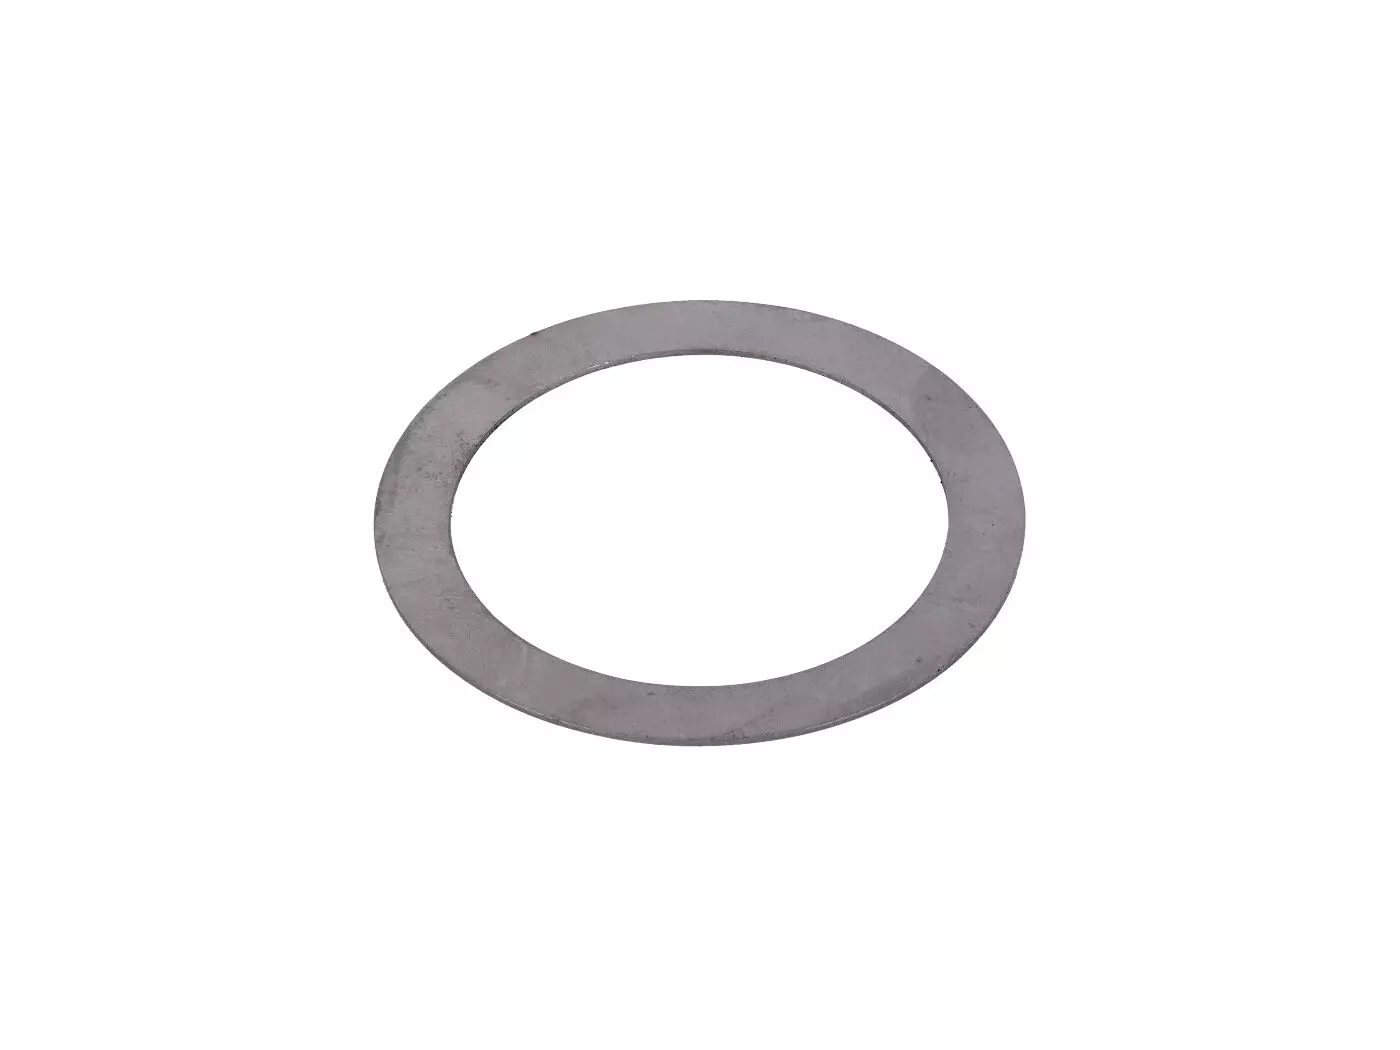 Drive Shaft Sealing Cap Spacer Disc 32x42x0.8mm For Simson S50, S51, S53, S70, S83, SR50, SR80, KR51, KR51/1, KR51/2, SR4-1, SR4-2, SR4-3, SR4-4